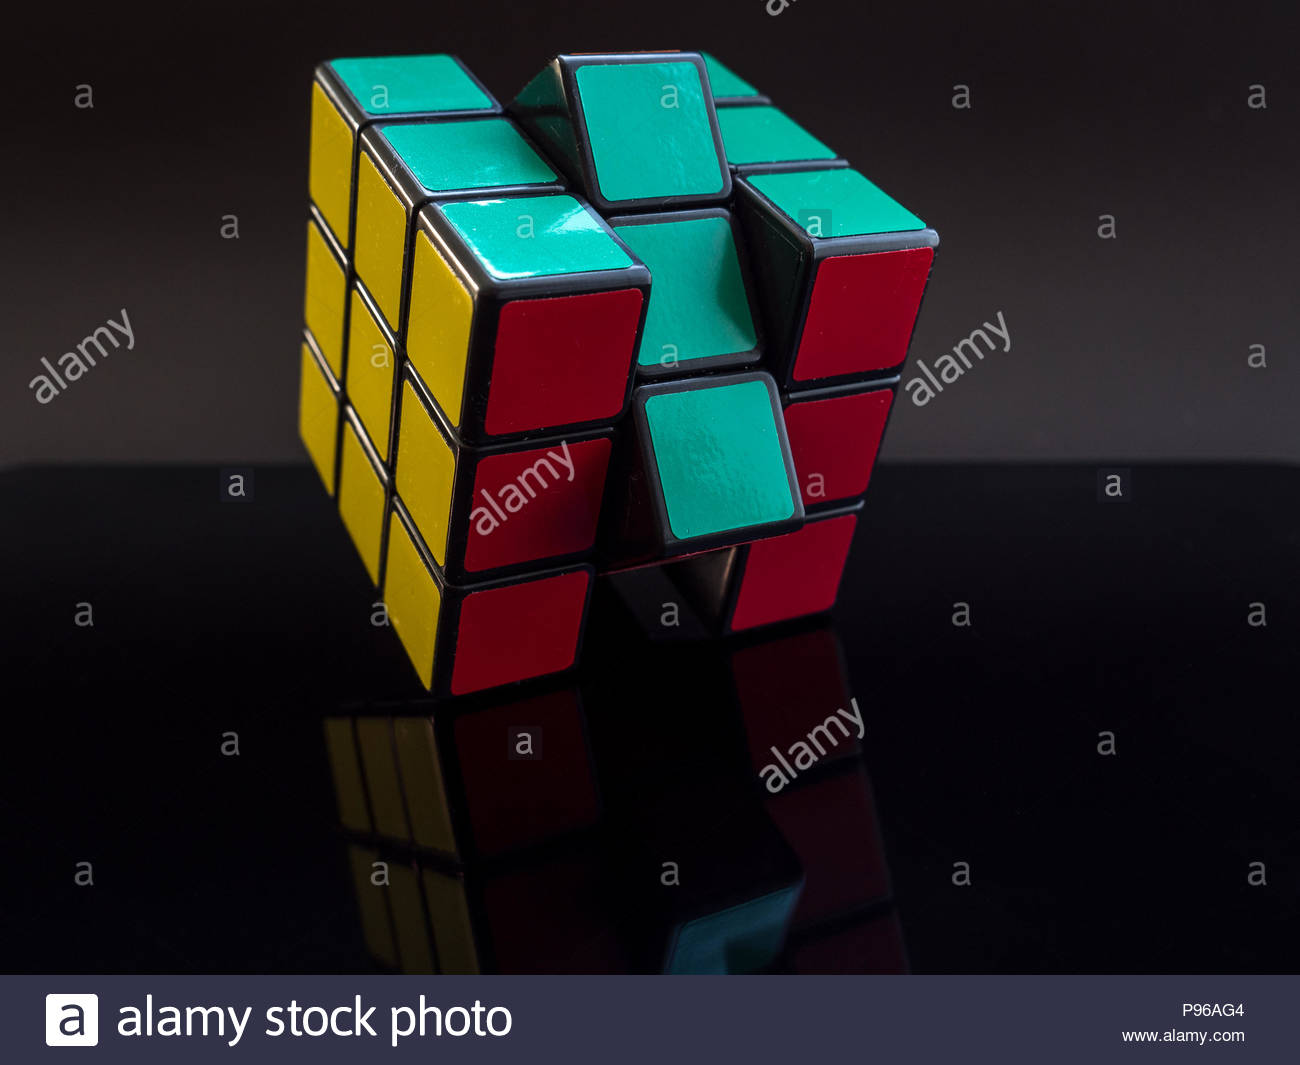 Rubik S Cube On Black Background With Reflection Solved Studio